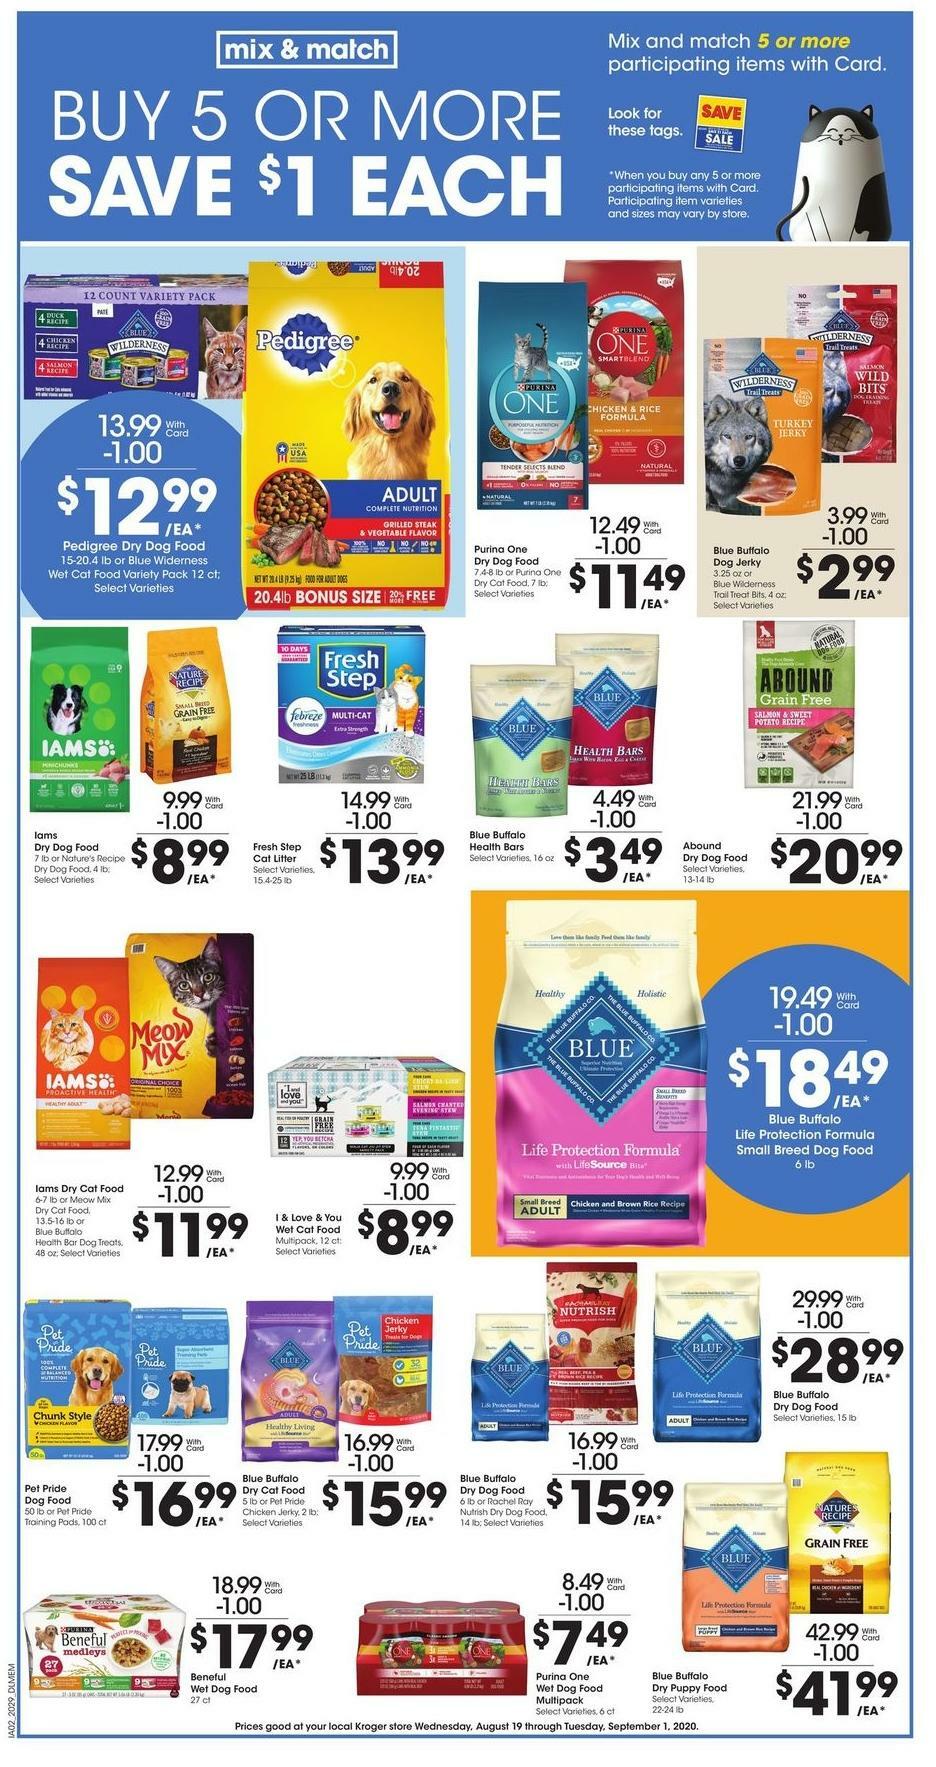 Kroger Weekly Ad from August 19